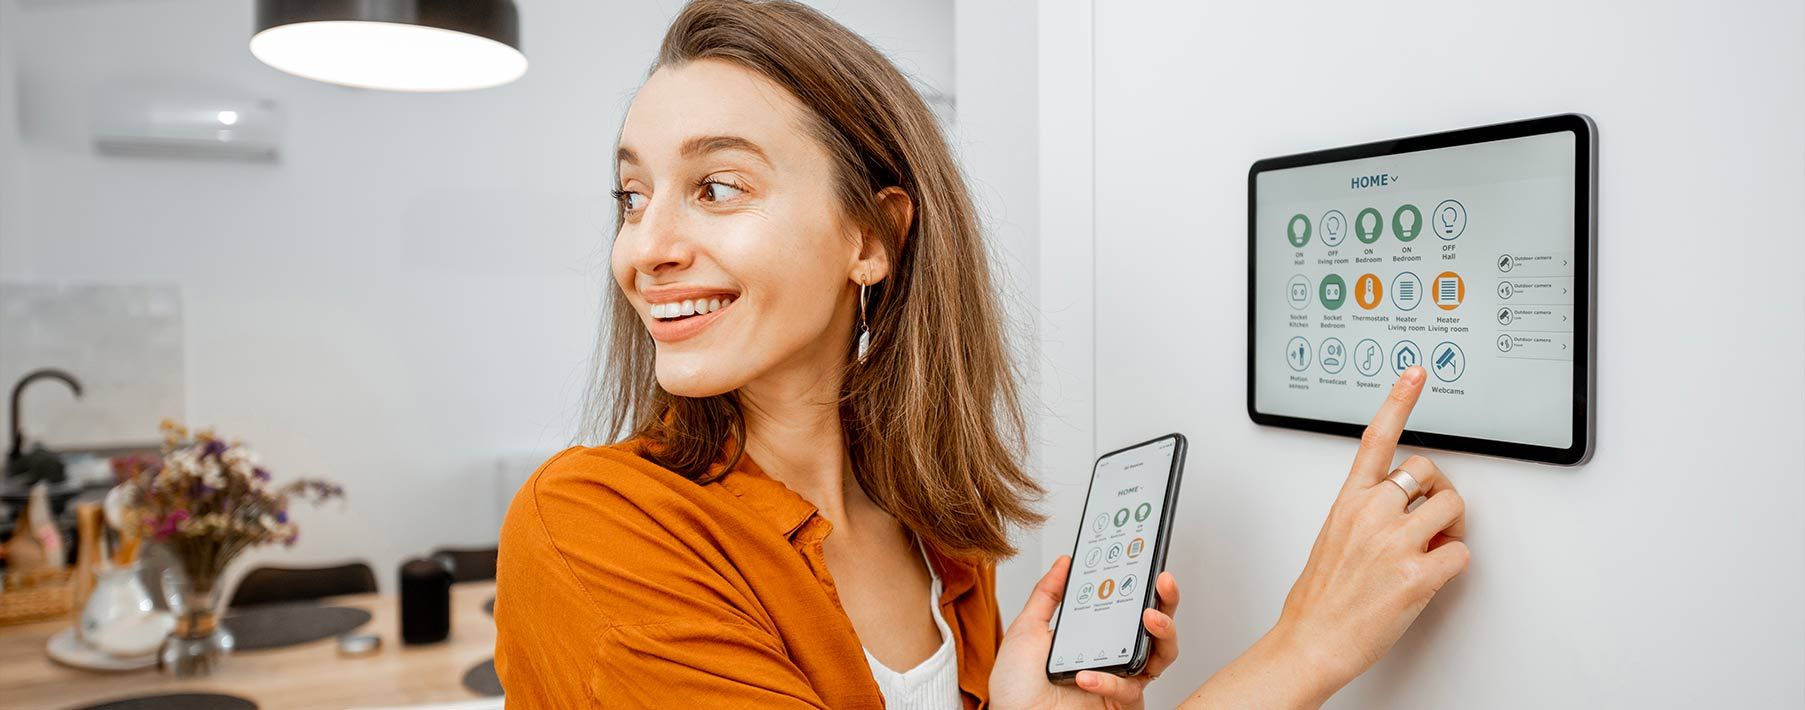 A woman smiling while using a tablet in the wall and holding a smart phone